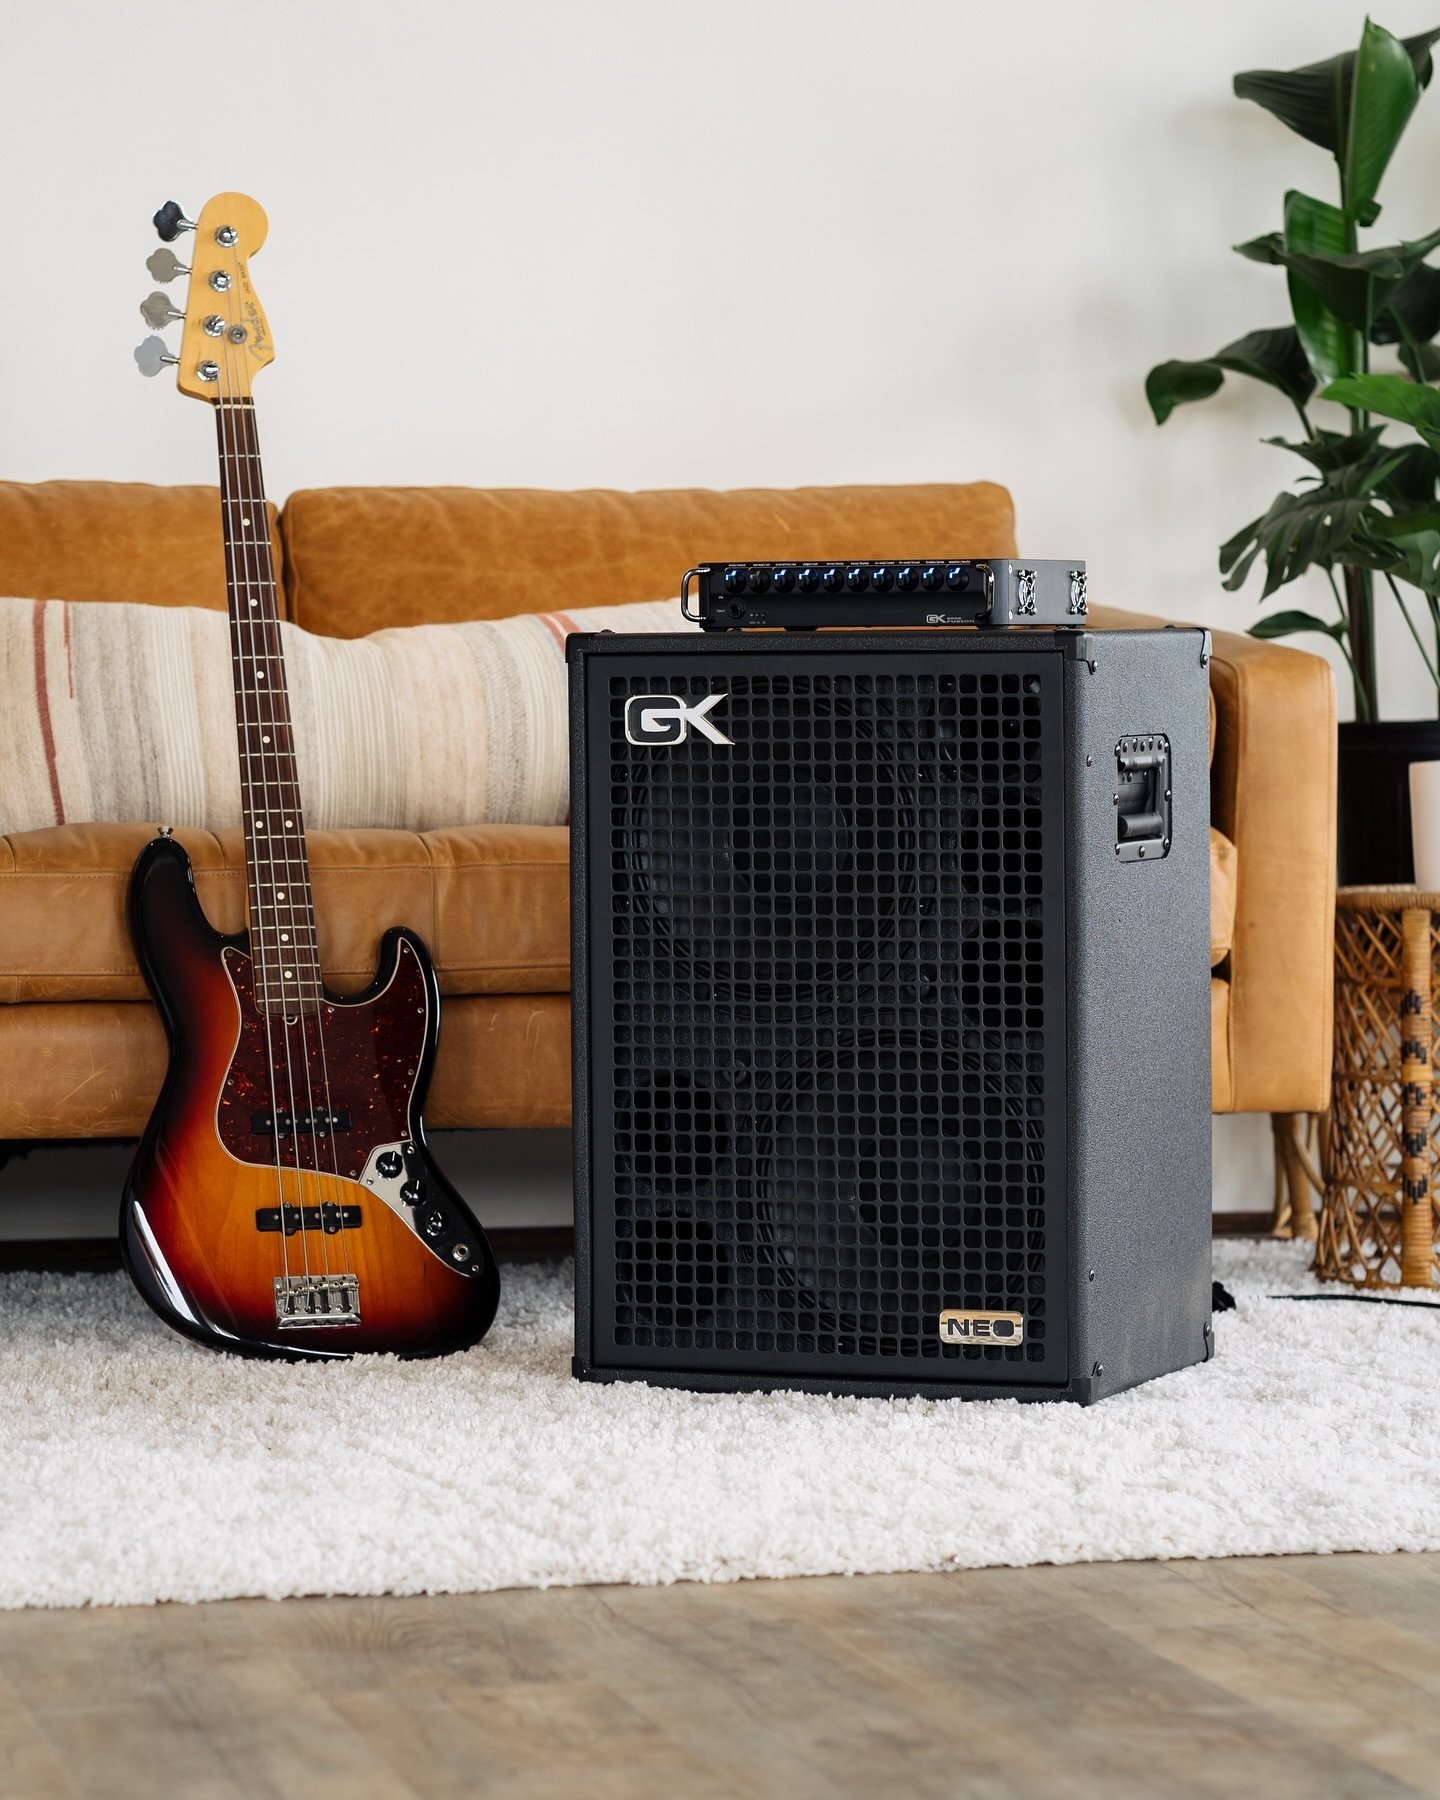 The NEO IV 212 cab is perfect for almost every occasion! Easy to transport, lightweight, and powerful! Pair it with a Legacy or Fusion S head and you&rsquo;ve got yourself the perfect professional compact rig! #gkallday #gallienkrueger #neoiv212